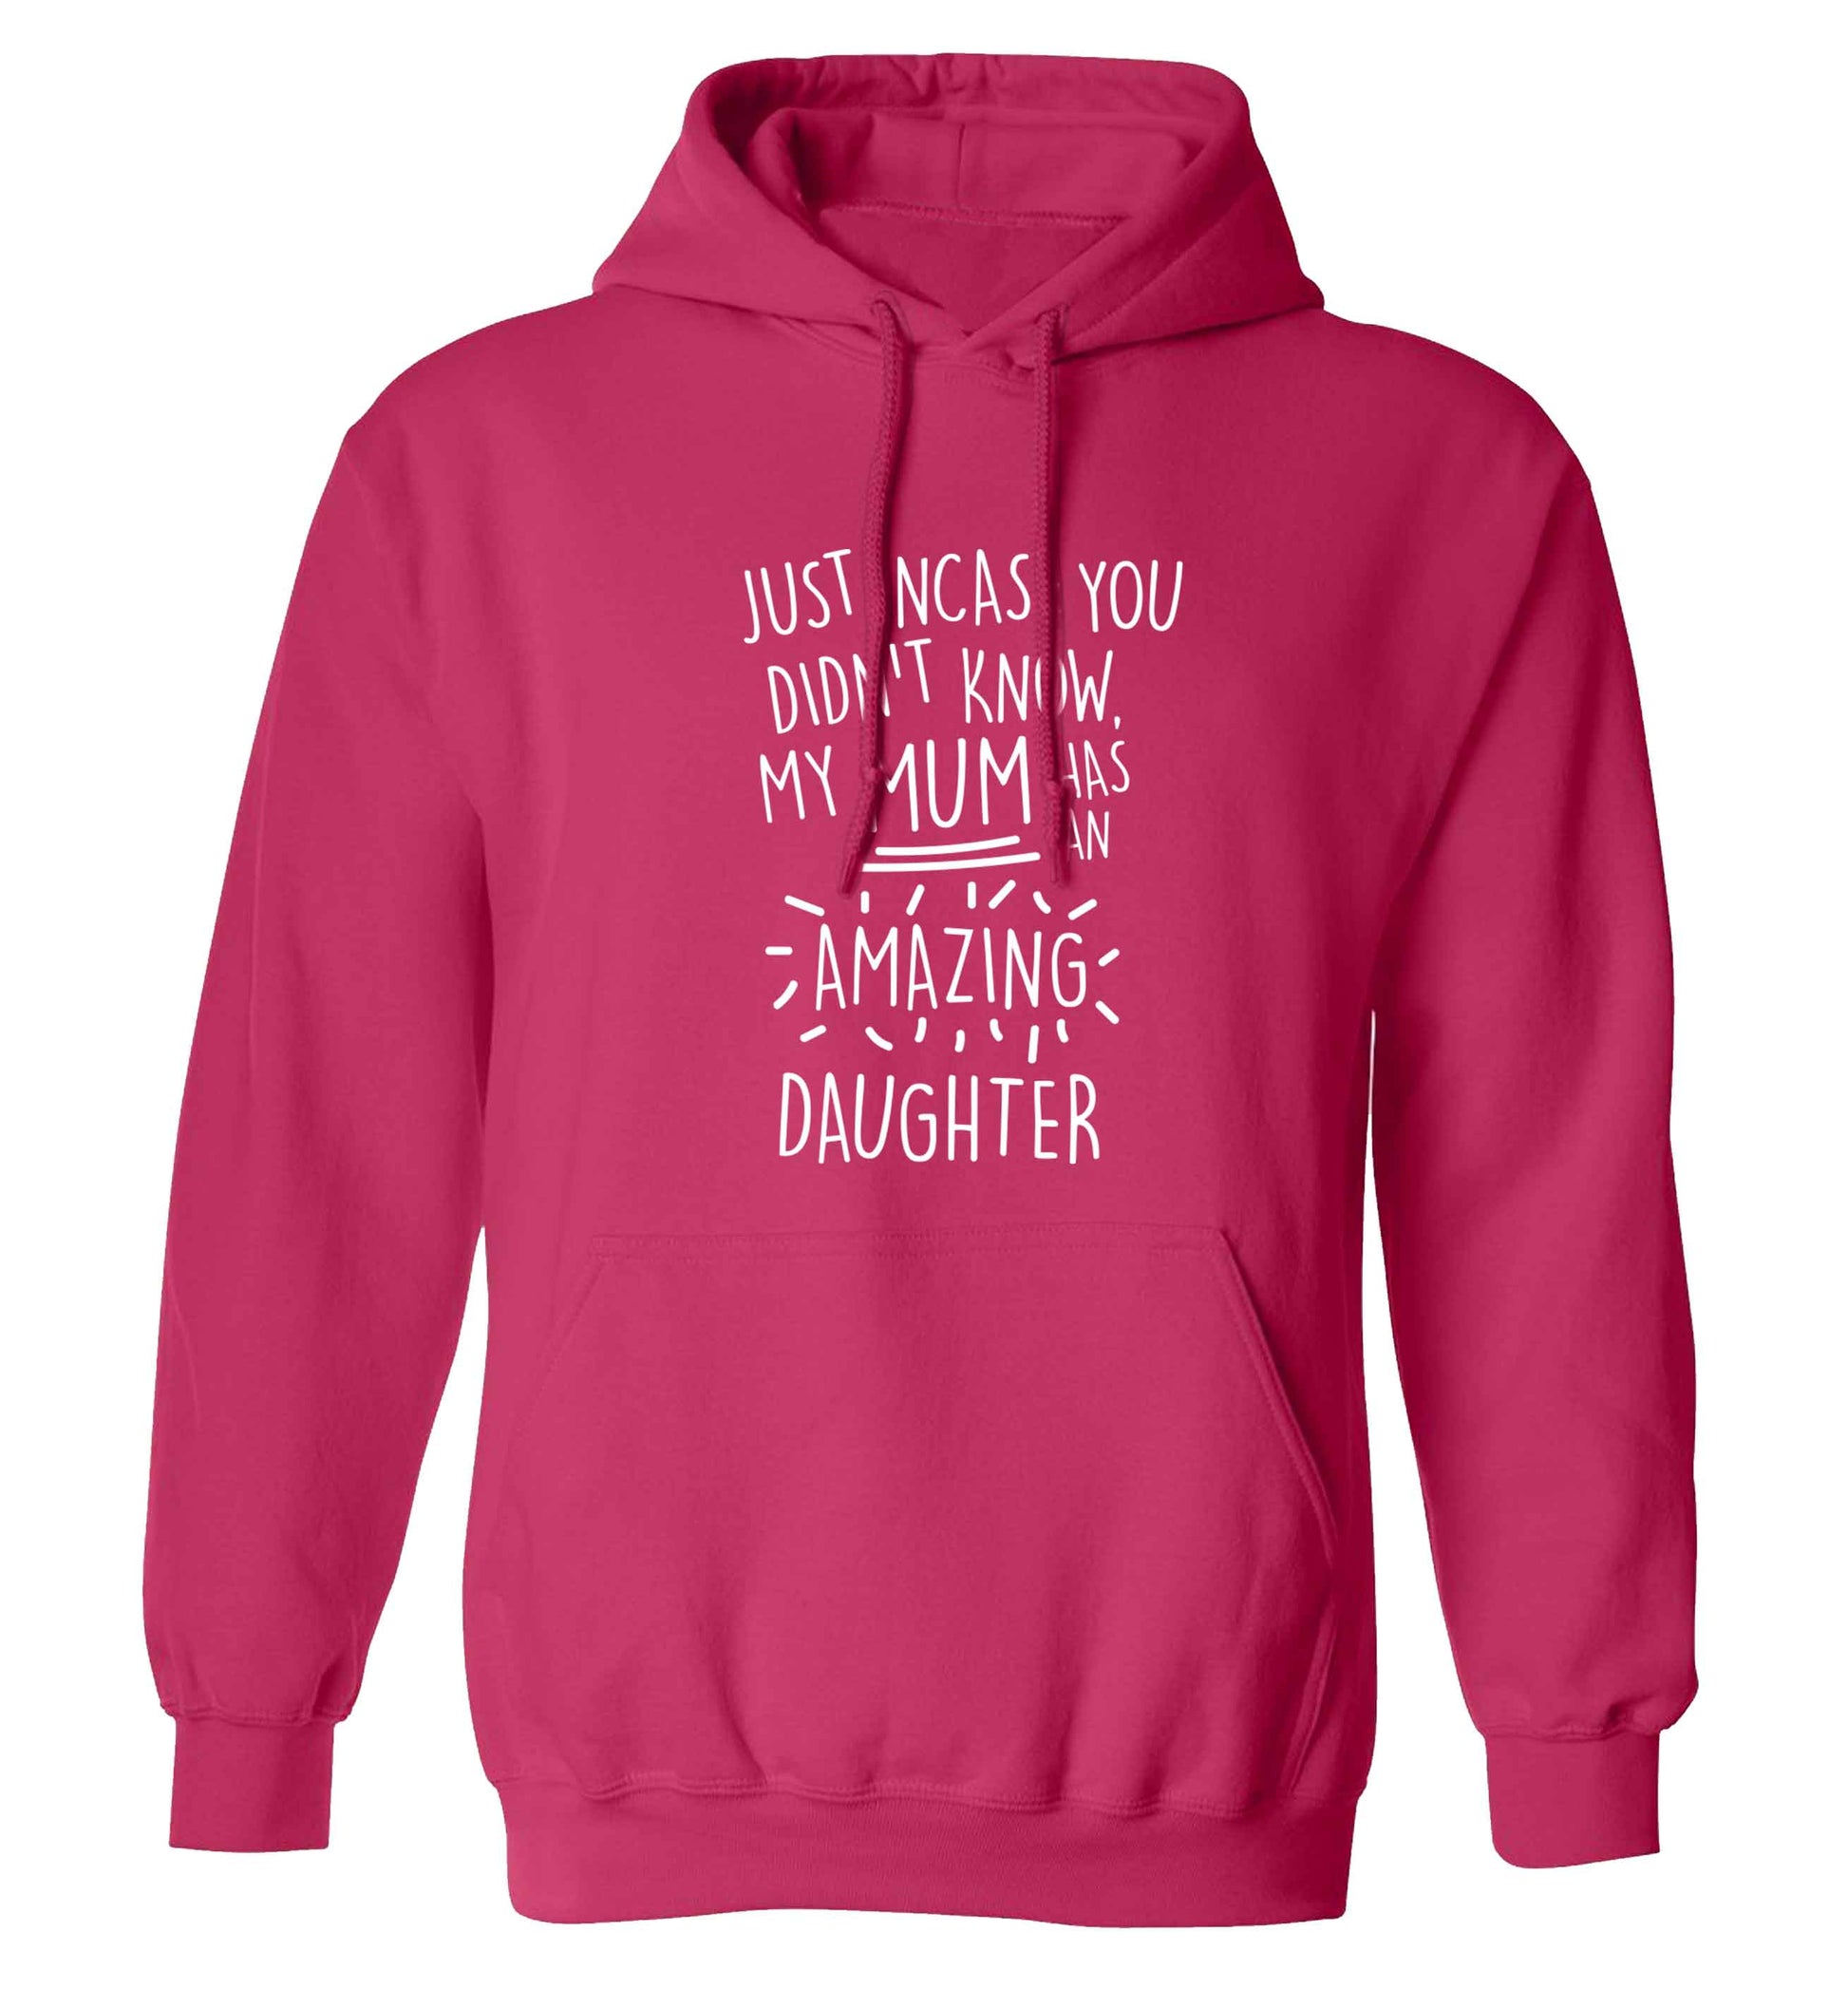 Just incase you didn't know my mum has an amazing daughter adults unisex pink hoodie 2XL